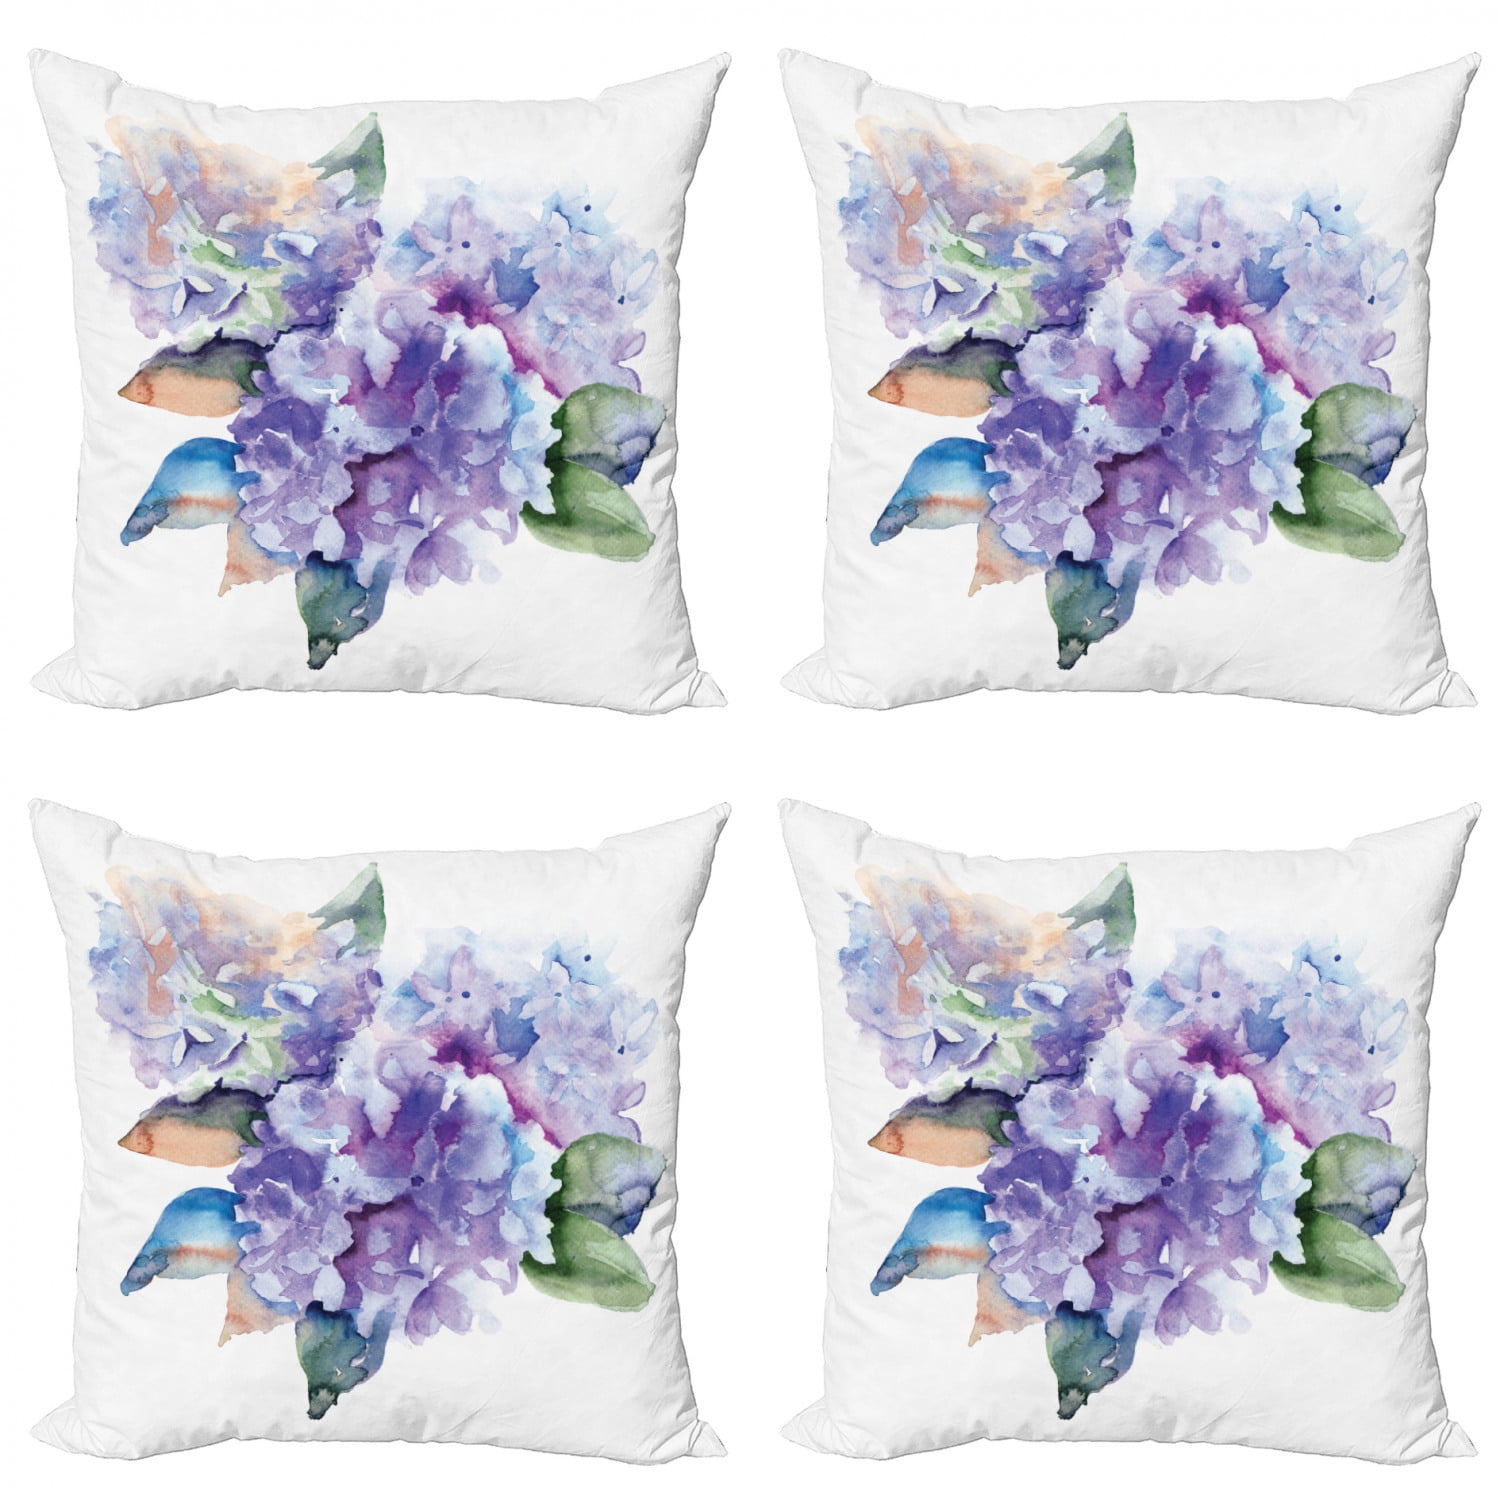 PILLOW COVER Lavender Purple Flower Watercolor Soft 2-Sided Cushion Case 18x18" 